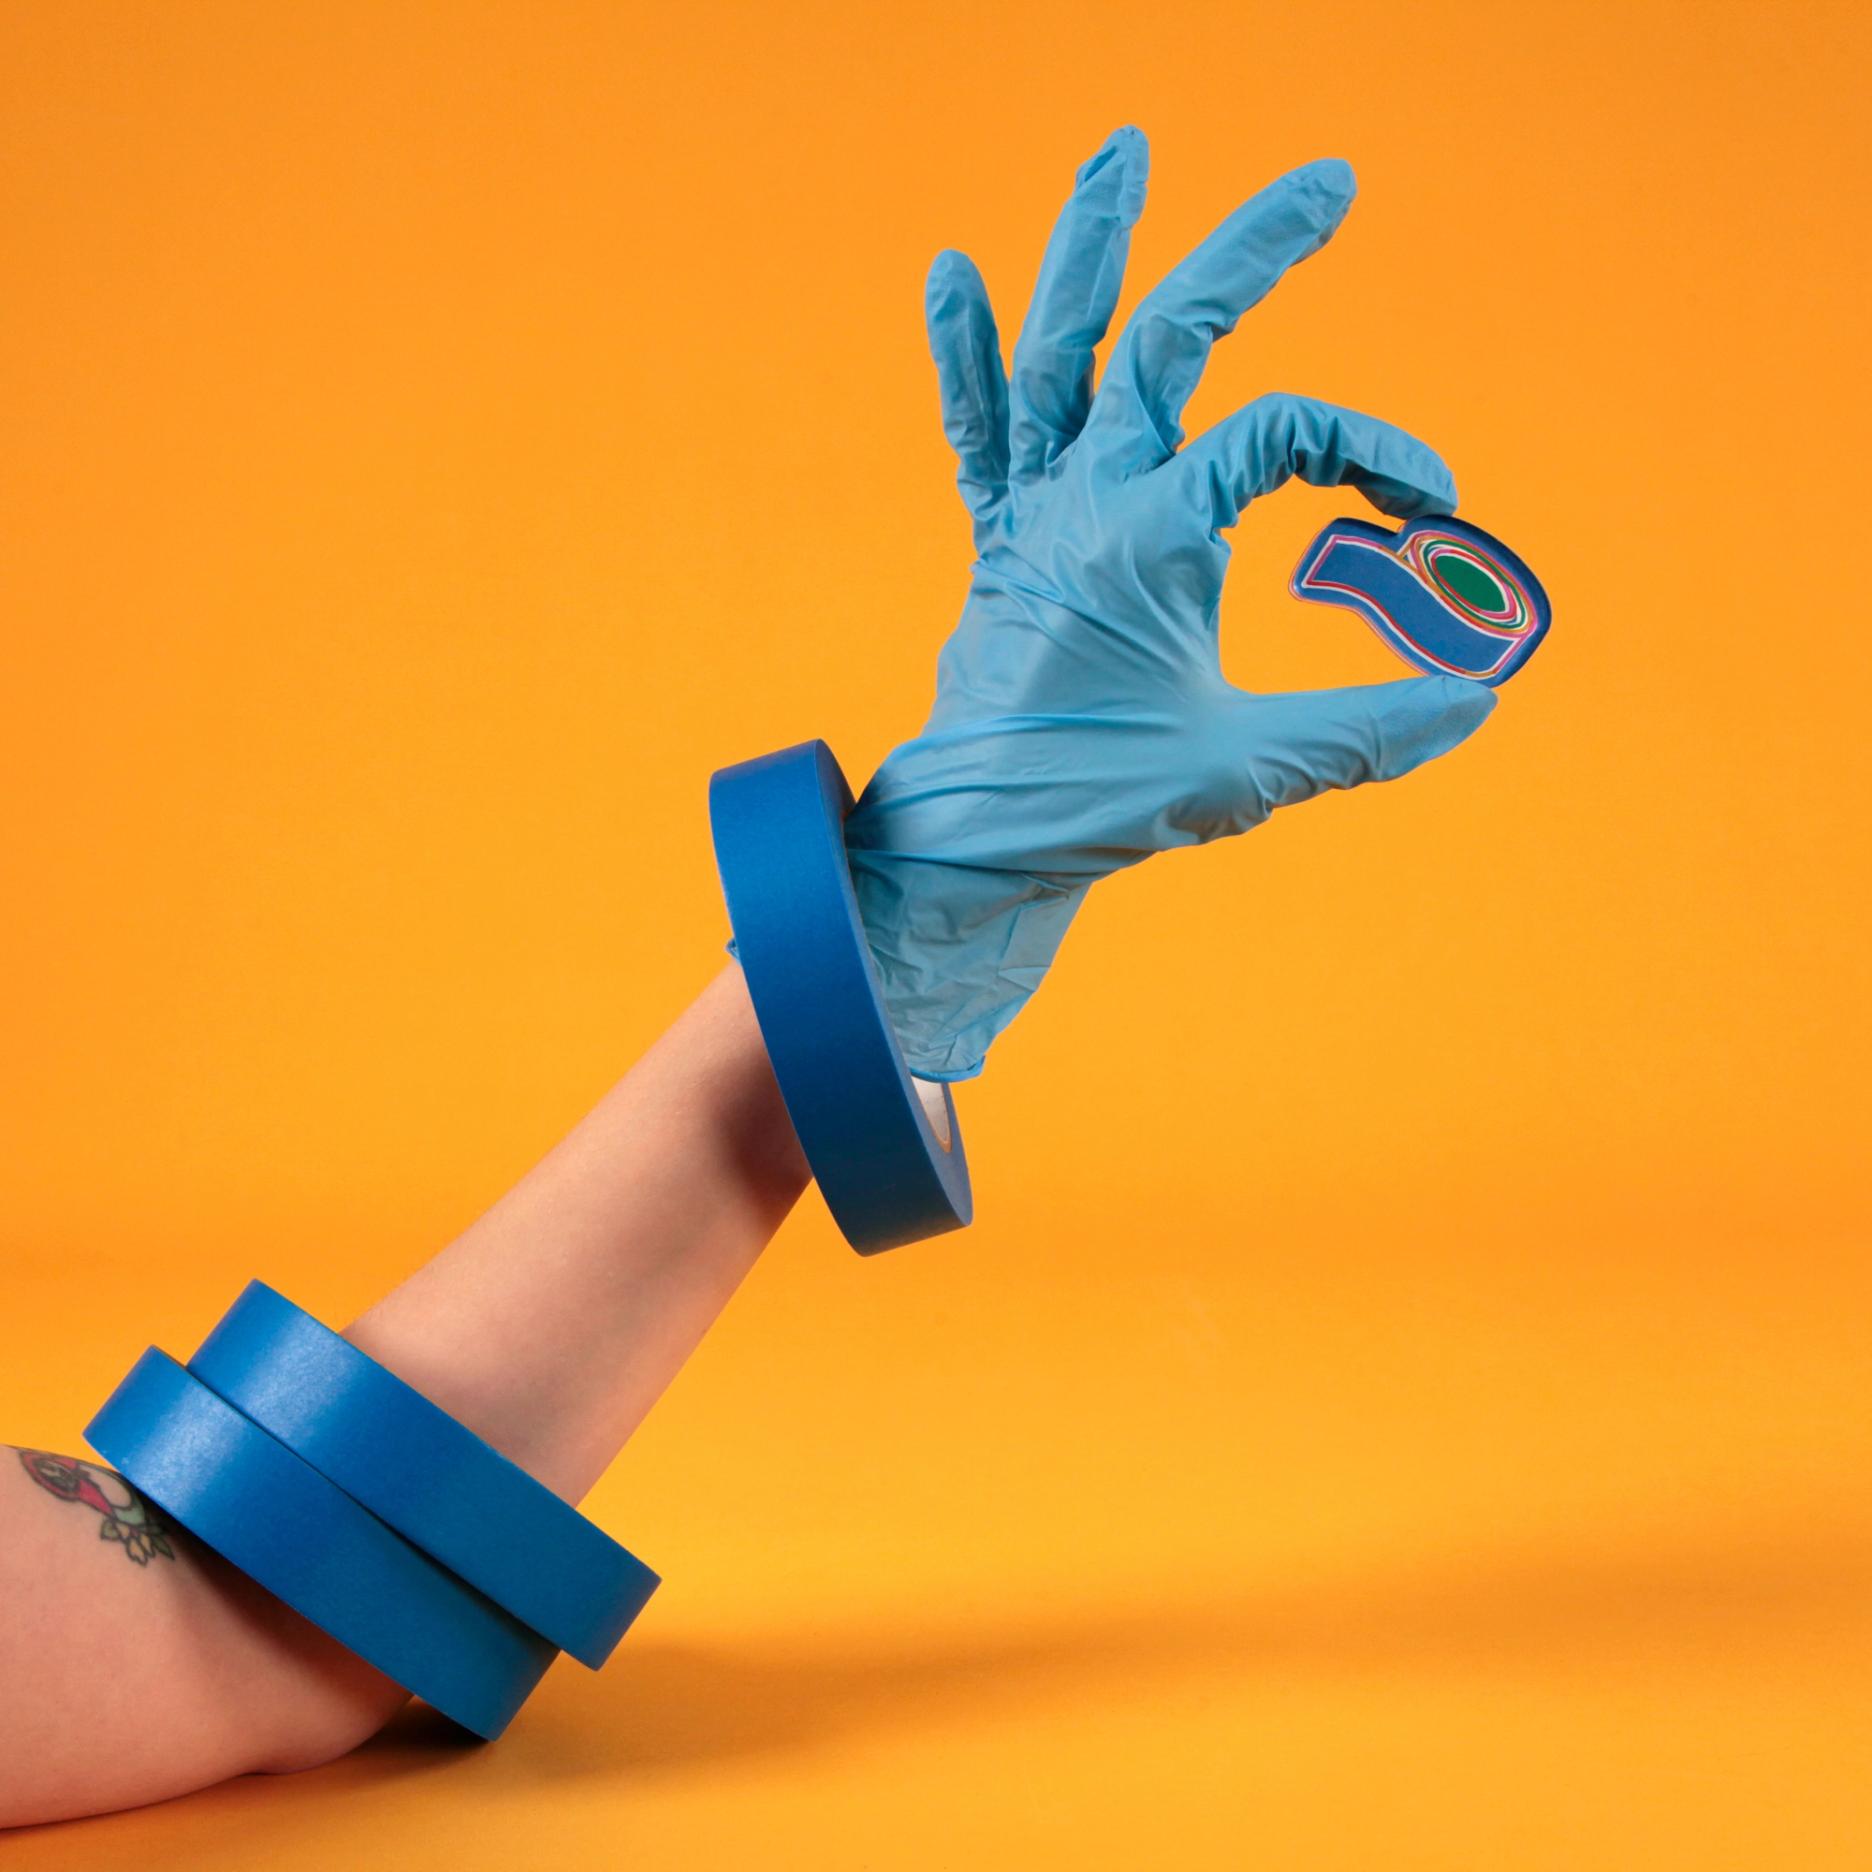 A hand wearing a blue glove with three rolls of blue tape around the wrist like bracelets is holding the blue tape magnet against a bright, warm yellow background.